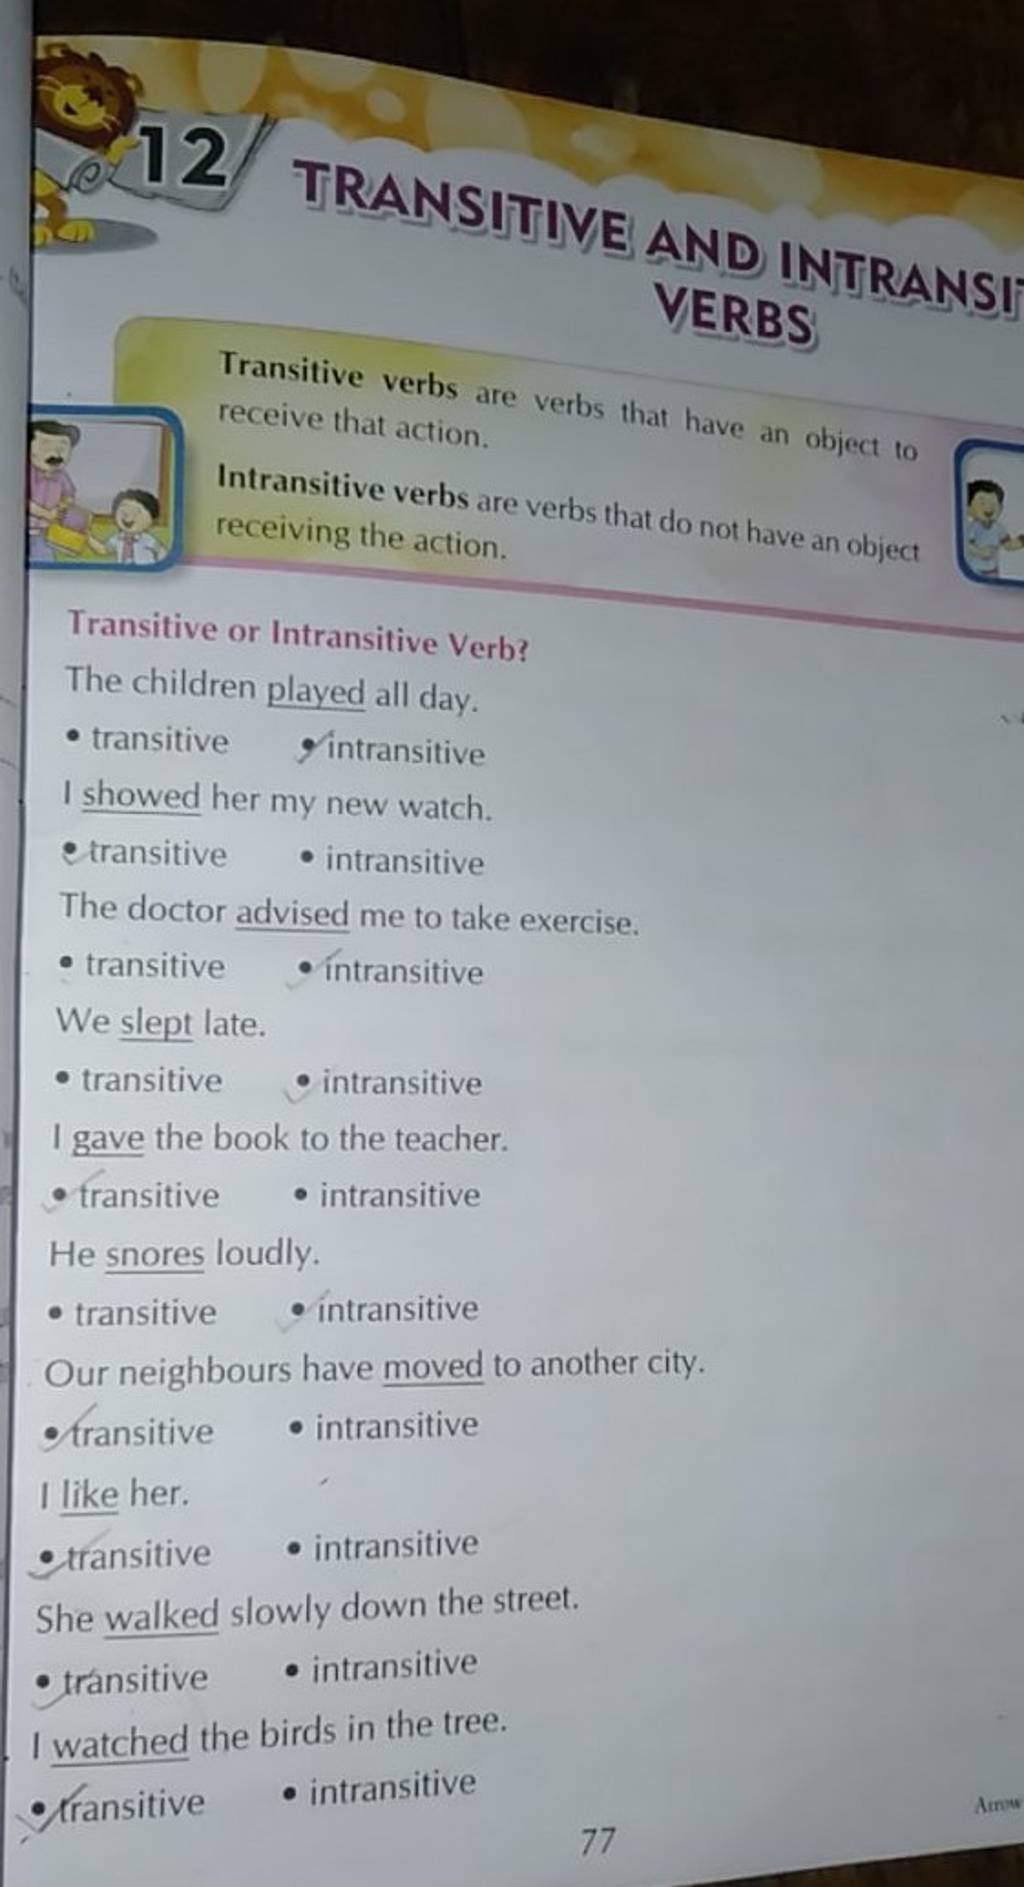 Class 7 Transitive And Intransitive Verbs Exercises With Answers